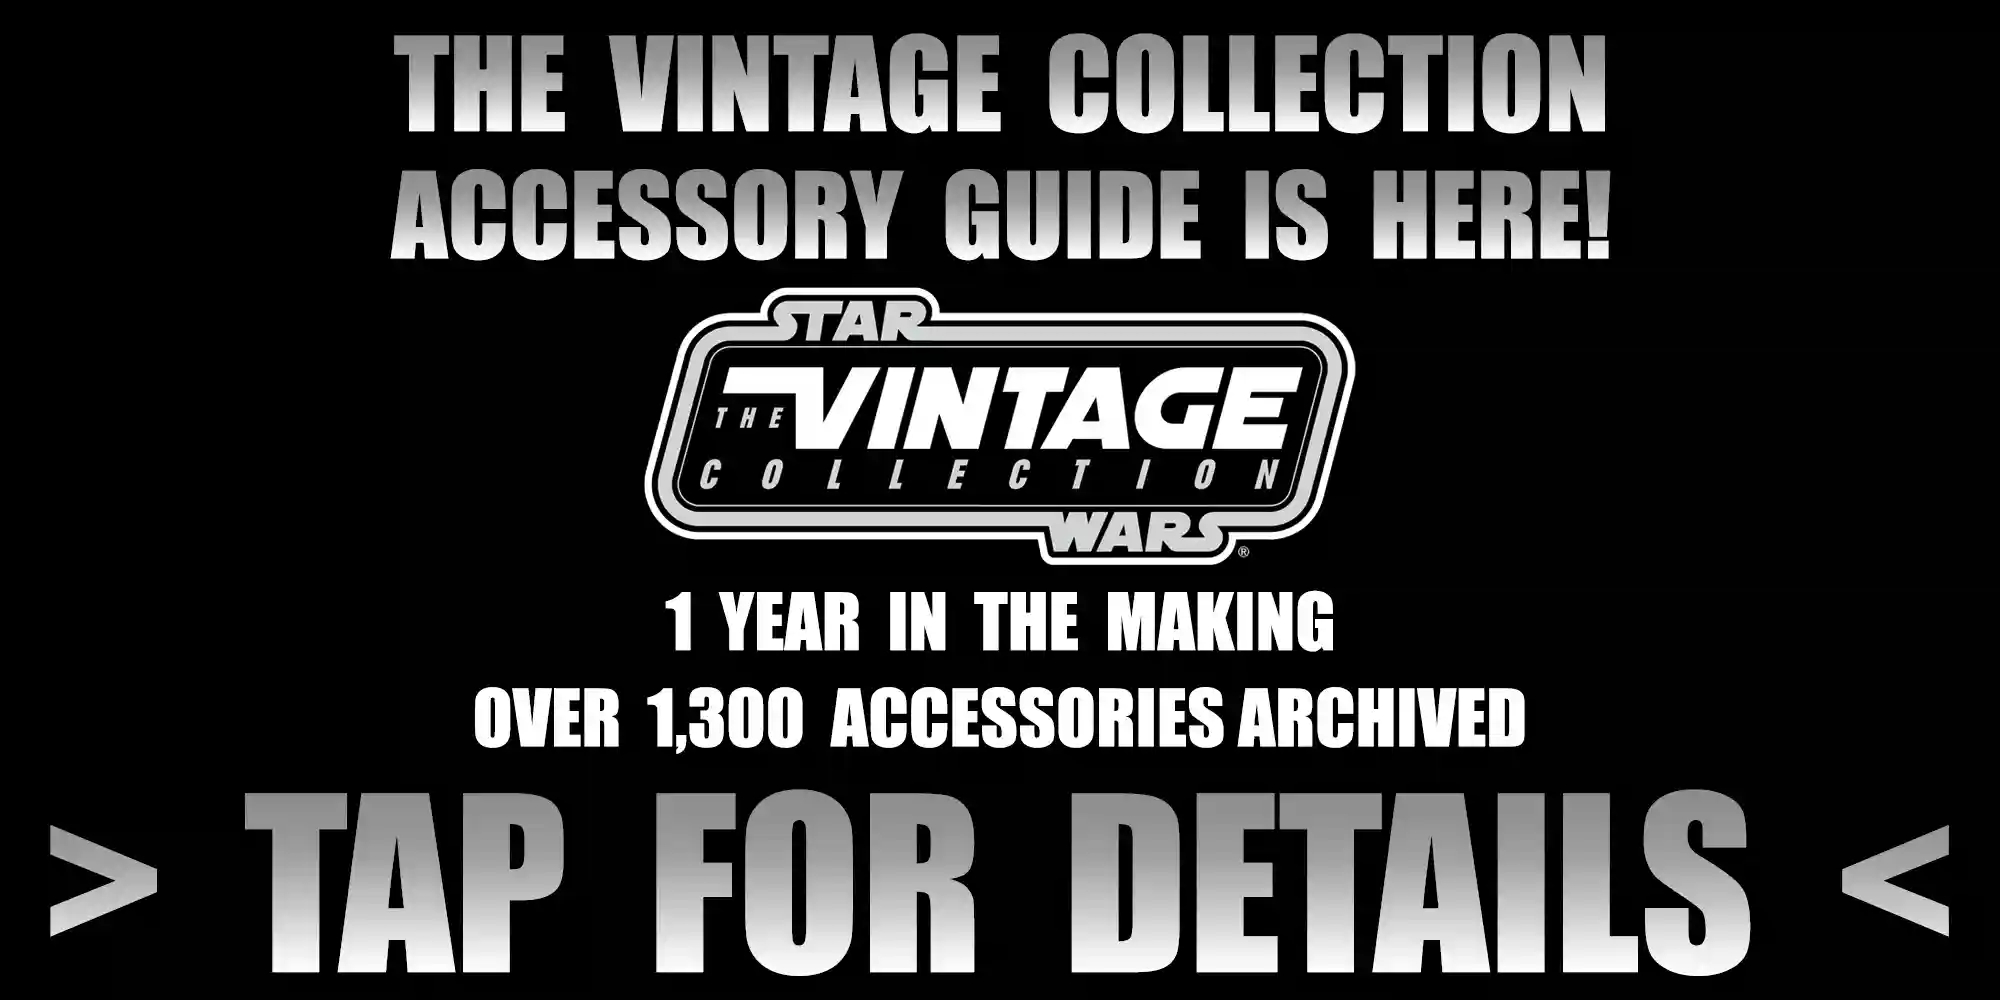 The Vintage Collection Accessory Guide Is Here! Check It Out!